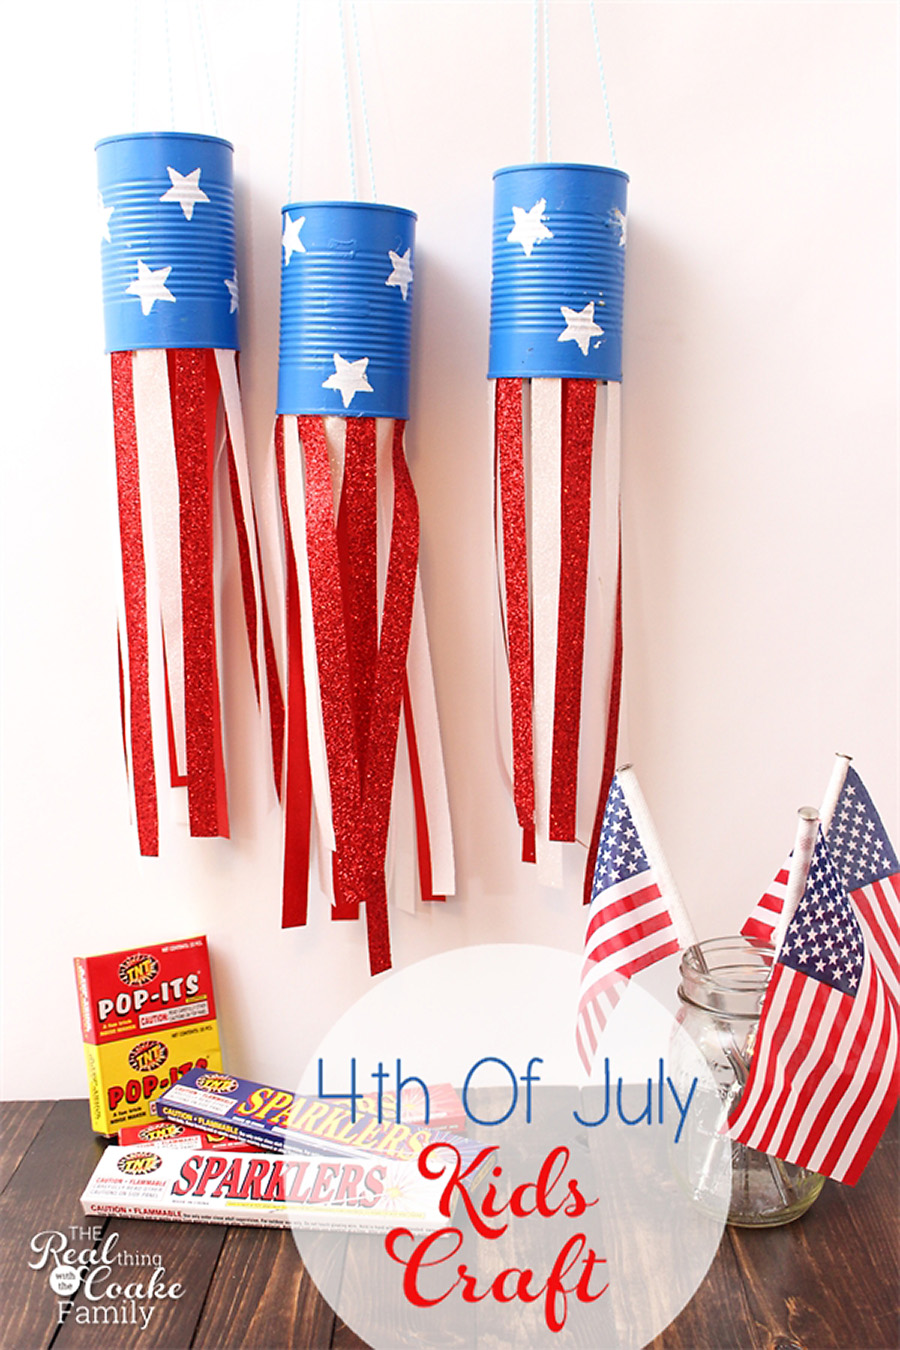 10 Fun and Free 4th of July Crafts for Kids - Our Handcrafted Life